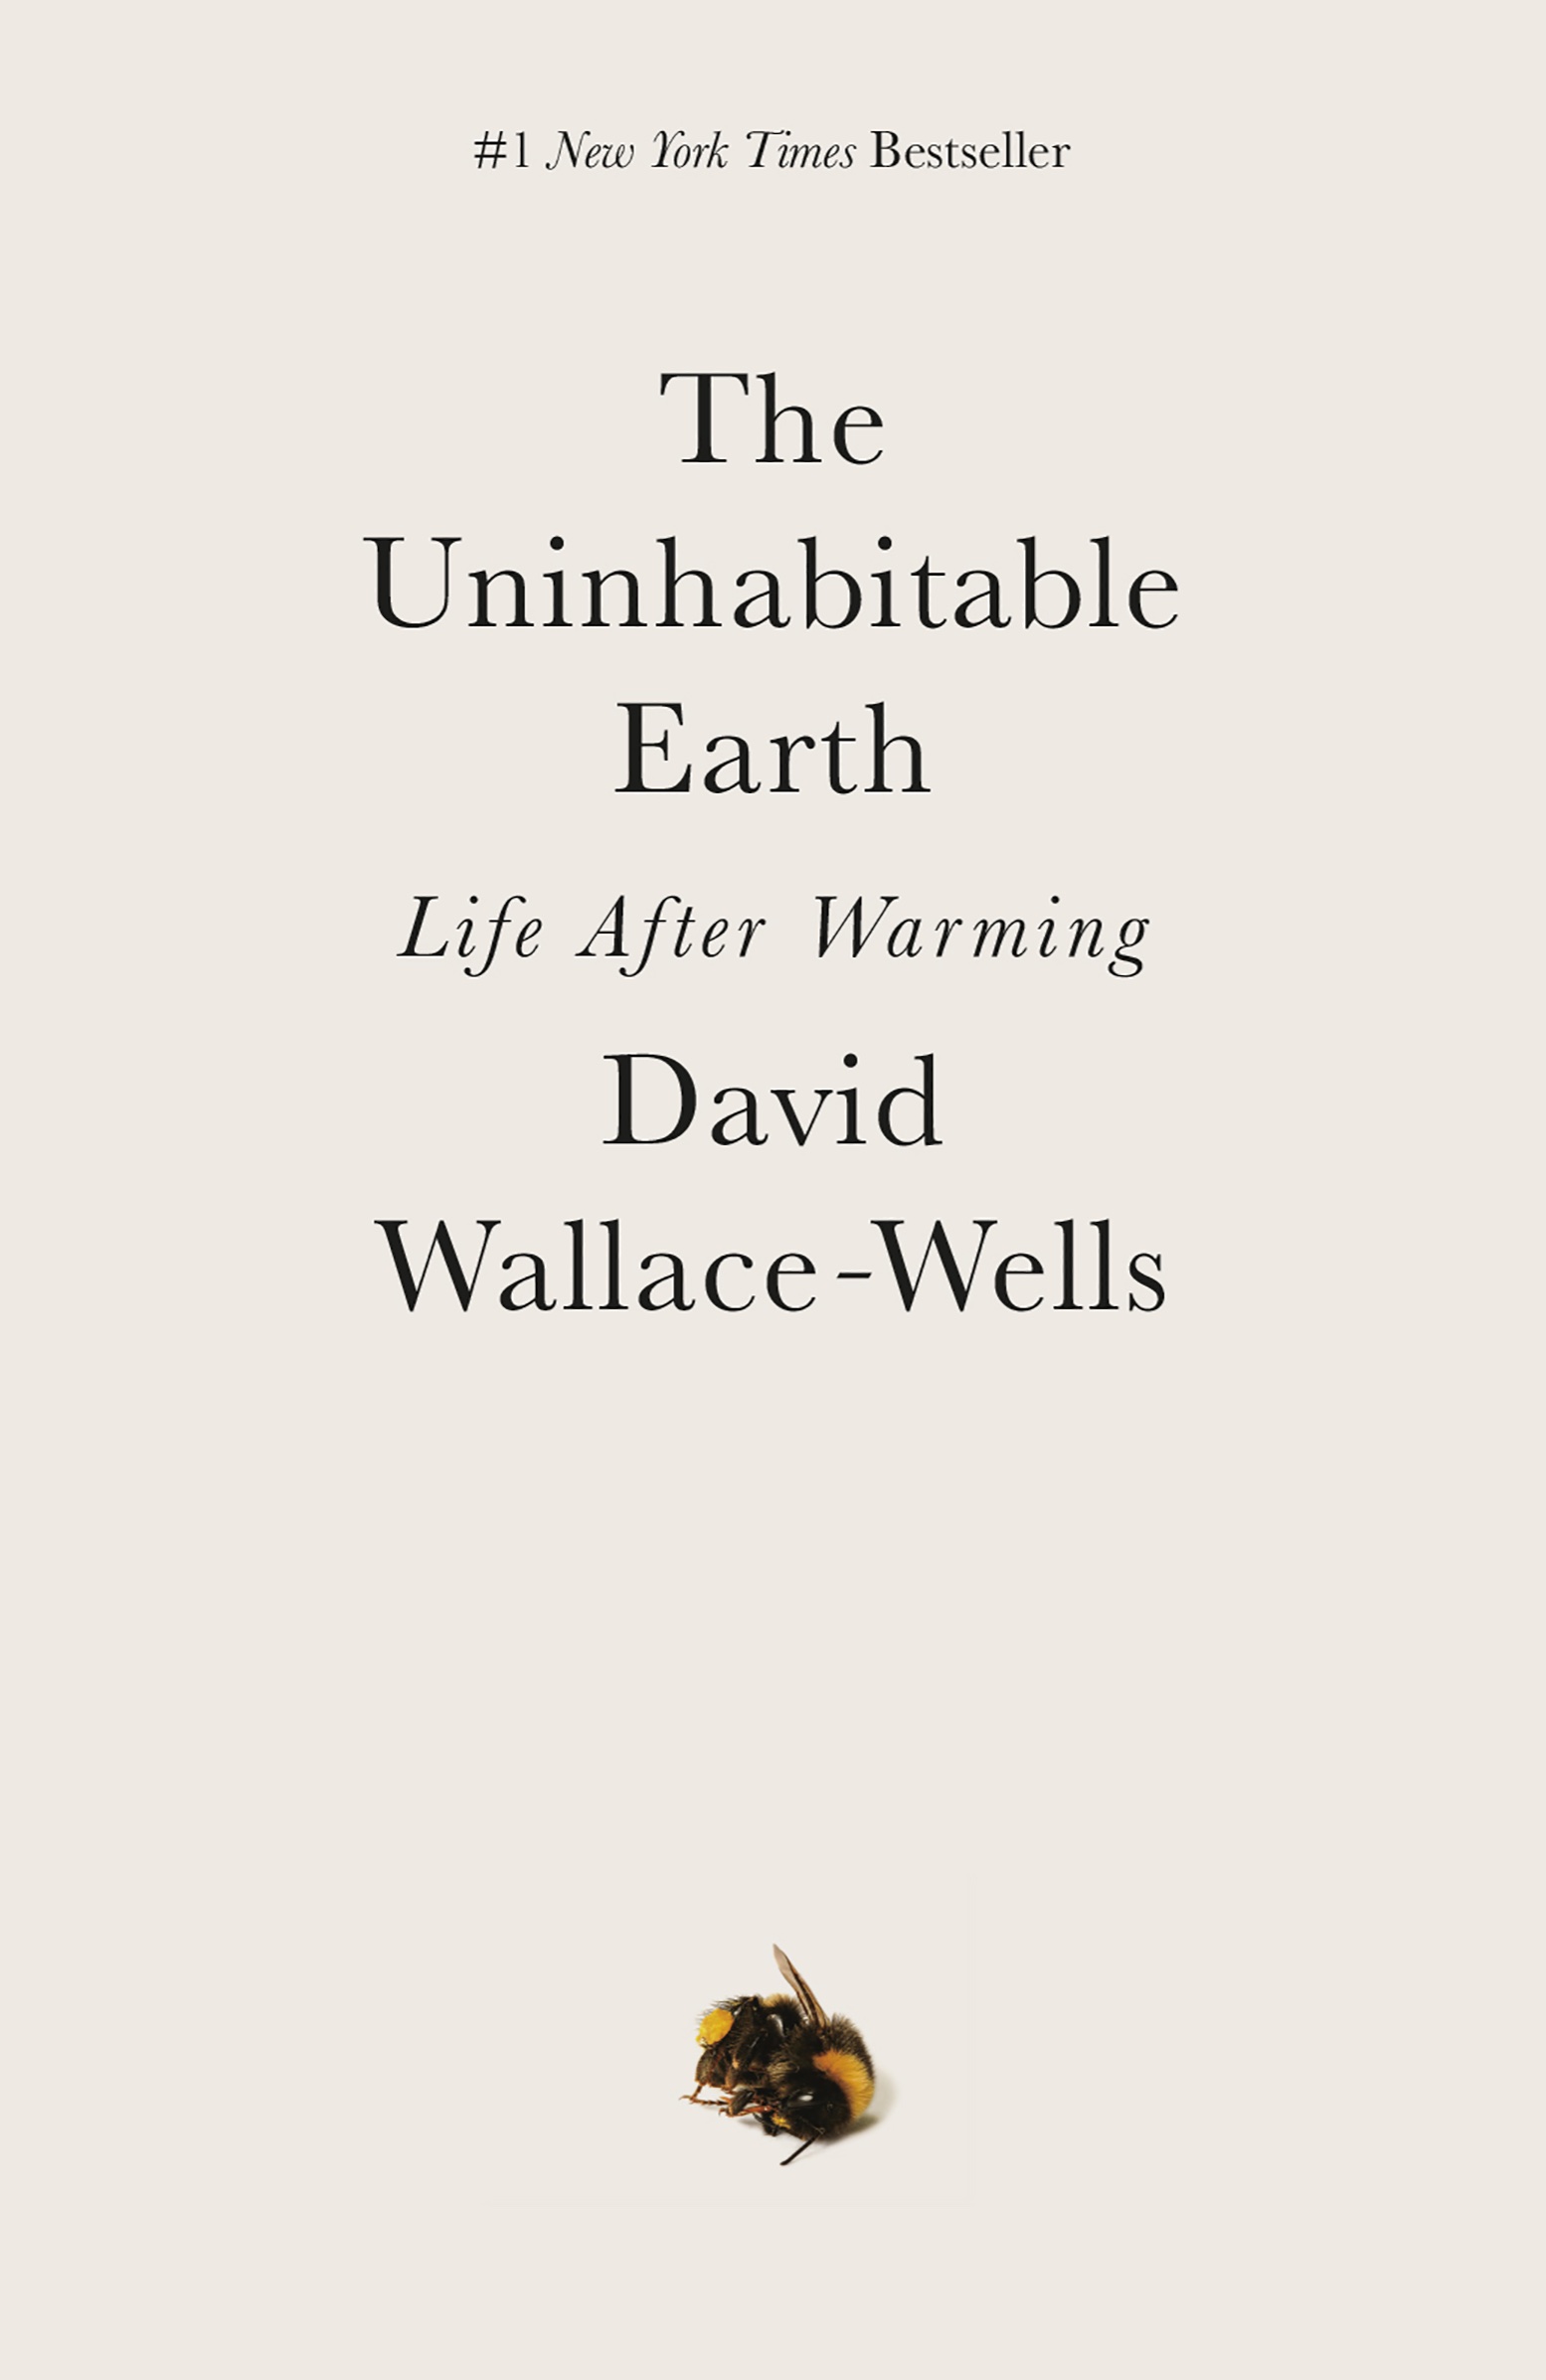 Cover of David Wallace-Wells book "The Uninhabitable Earth: Life After Warming"